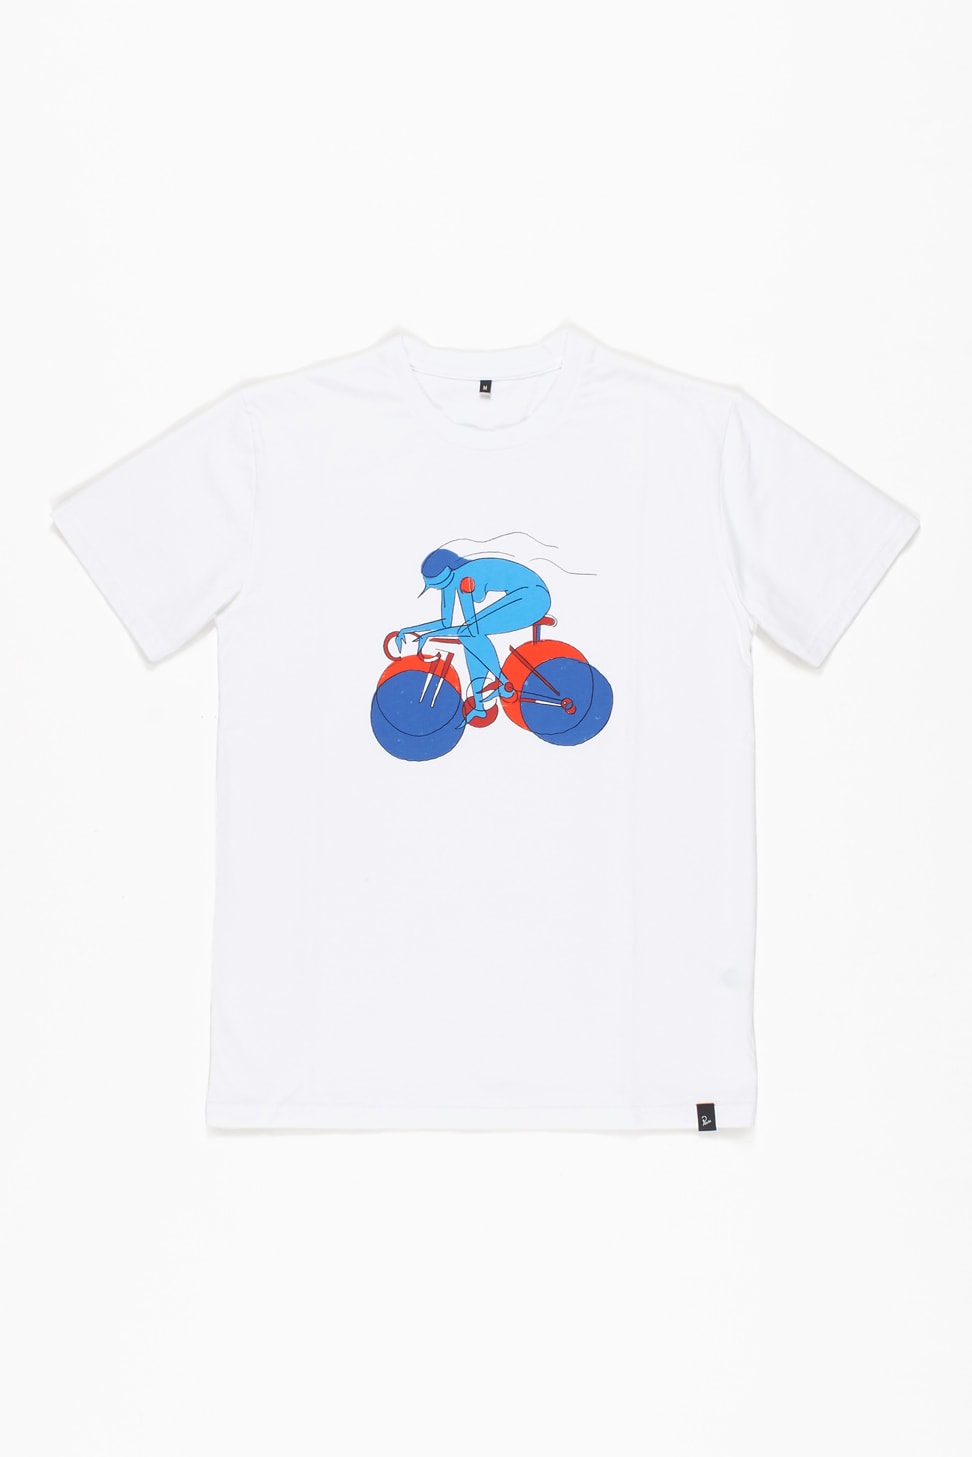 parra graphic tees apparel clothing bottle opener streetwear fashion style